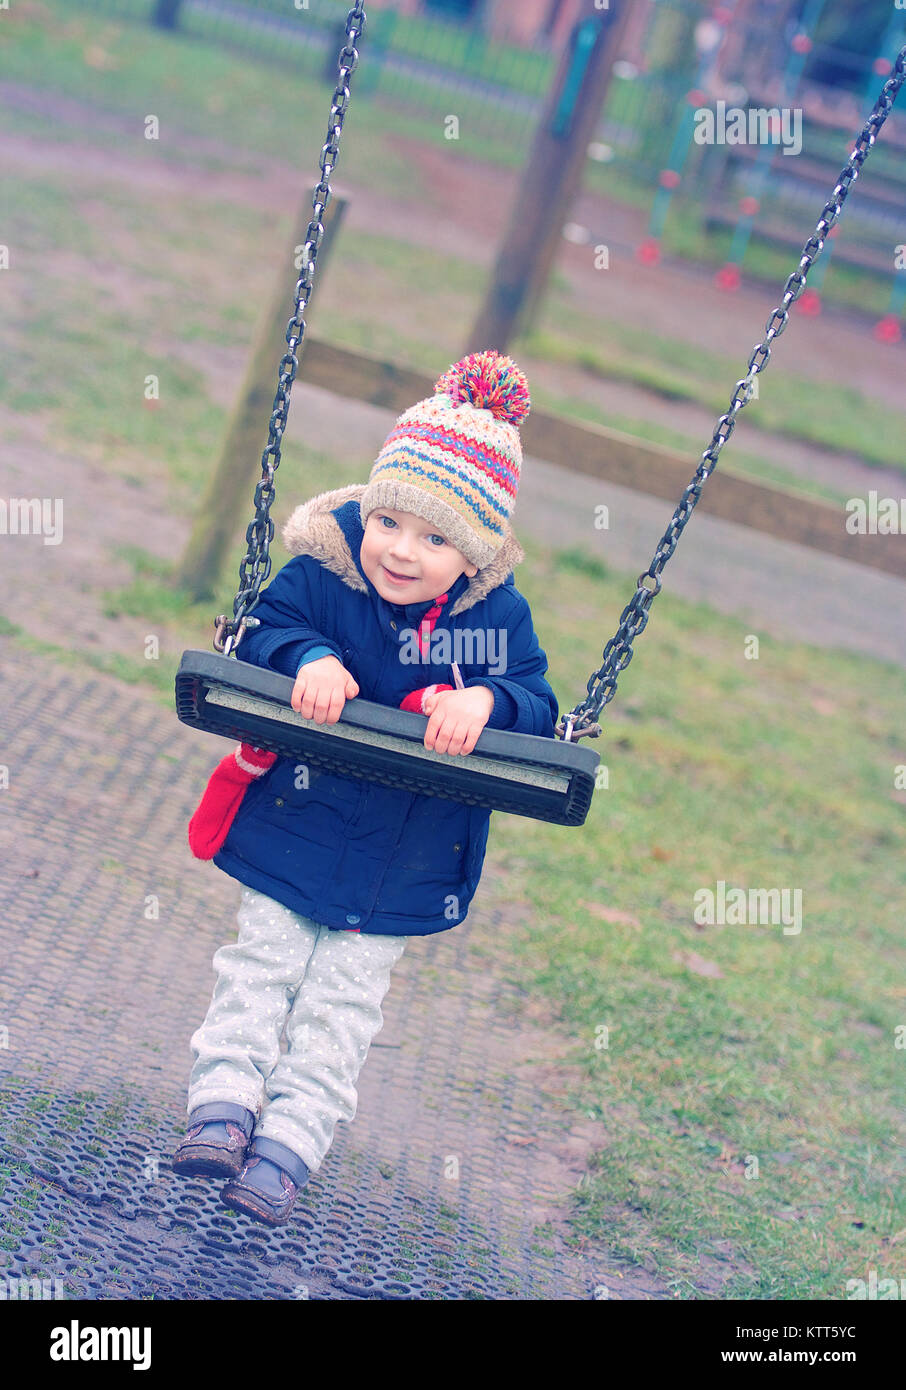 Girl hanging on a swing in the playground Stock Photo